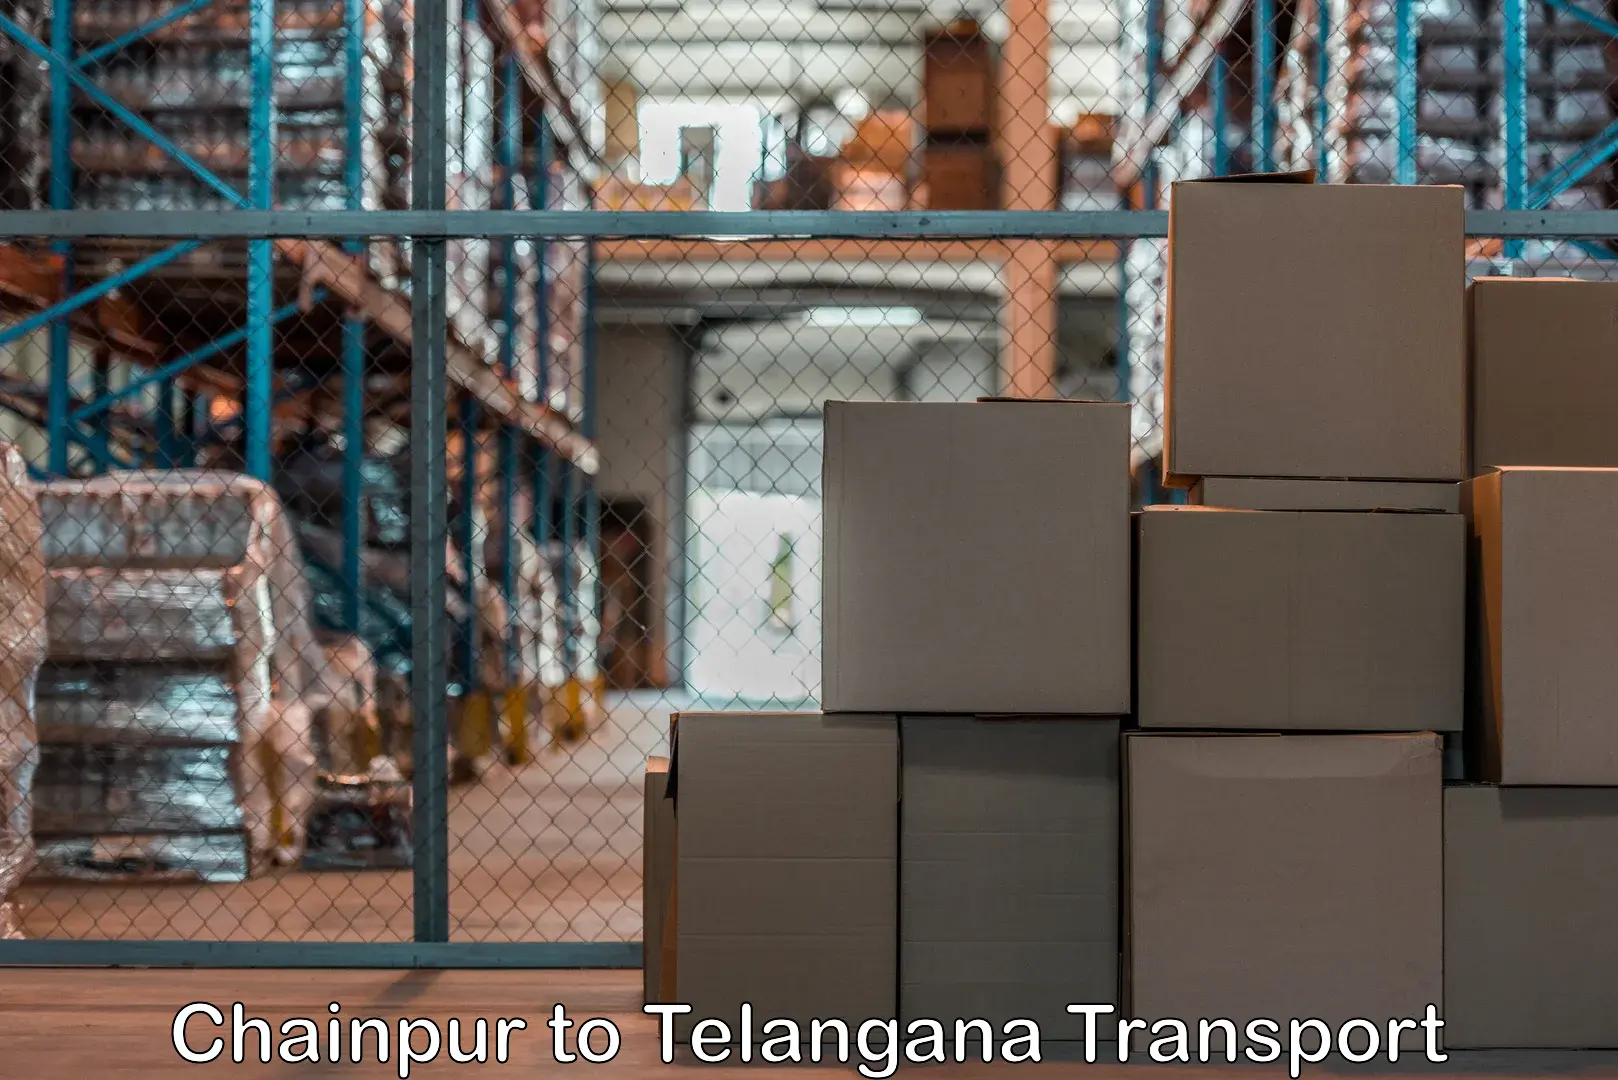 Vehicle transport services in Chainpur to Jangaon